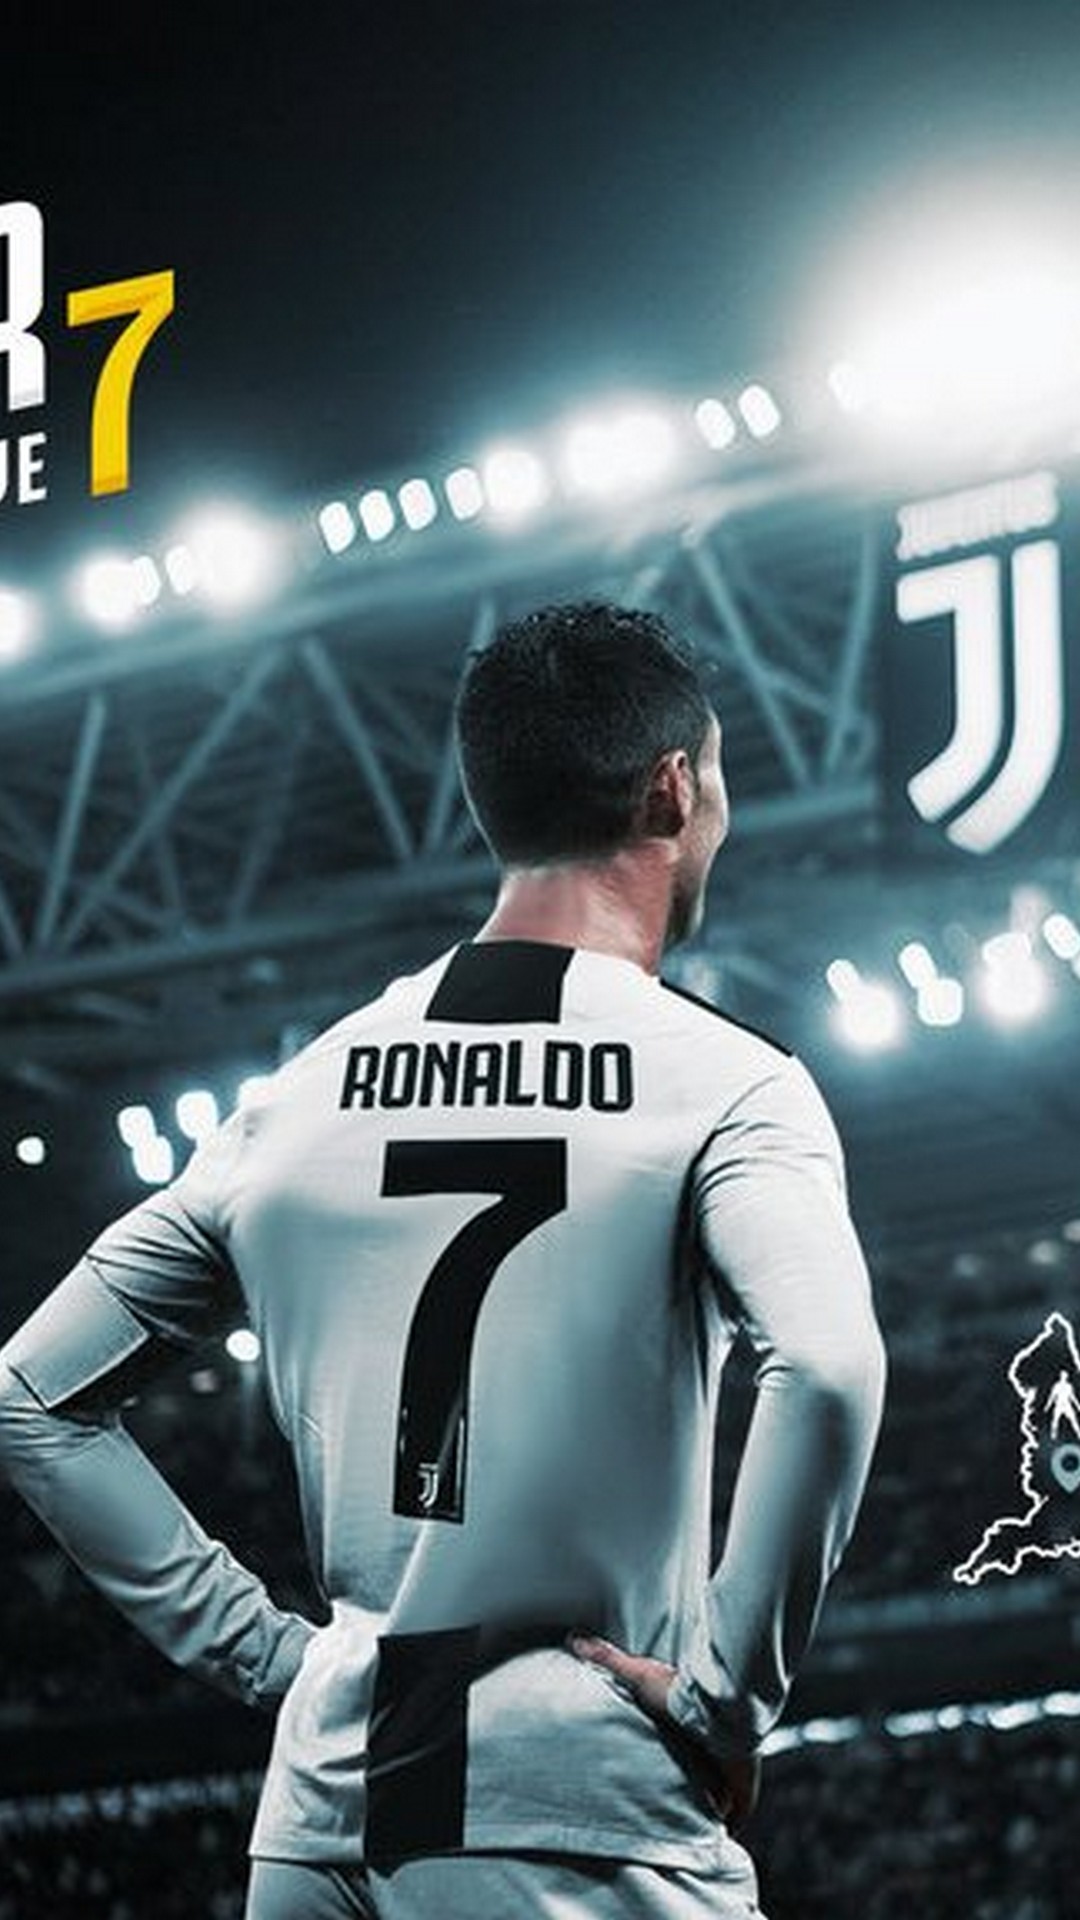 CR7 Juventus iPhone Wallpaper with image resolution 1080x1920 pixel. You can make this wallpaper for your iPhone 5, 6, 7, 8, X backgrounds, Mobile Screensaver, or iPad Lock Screen